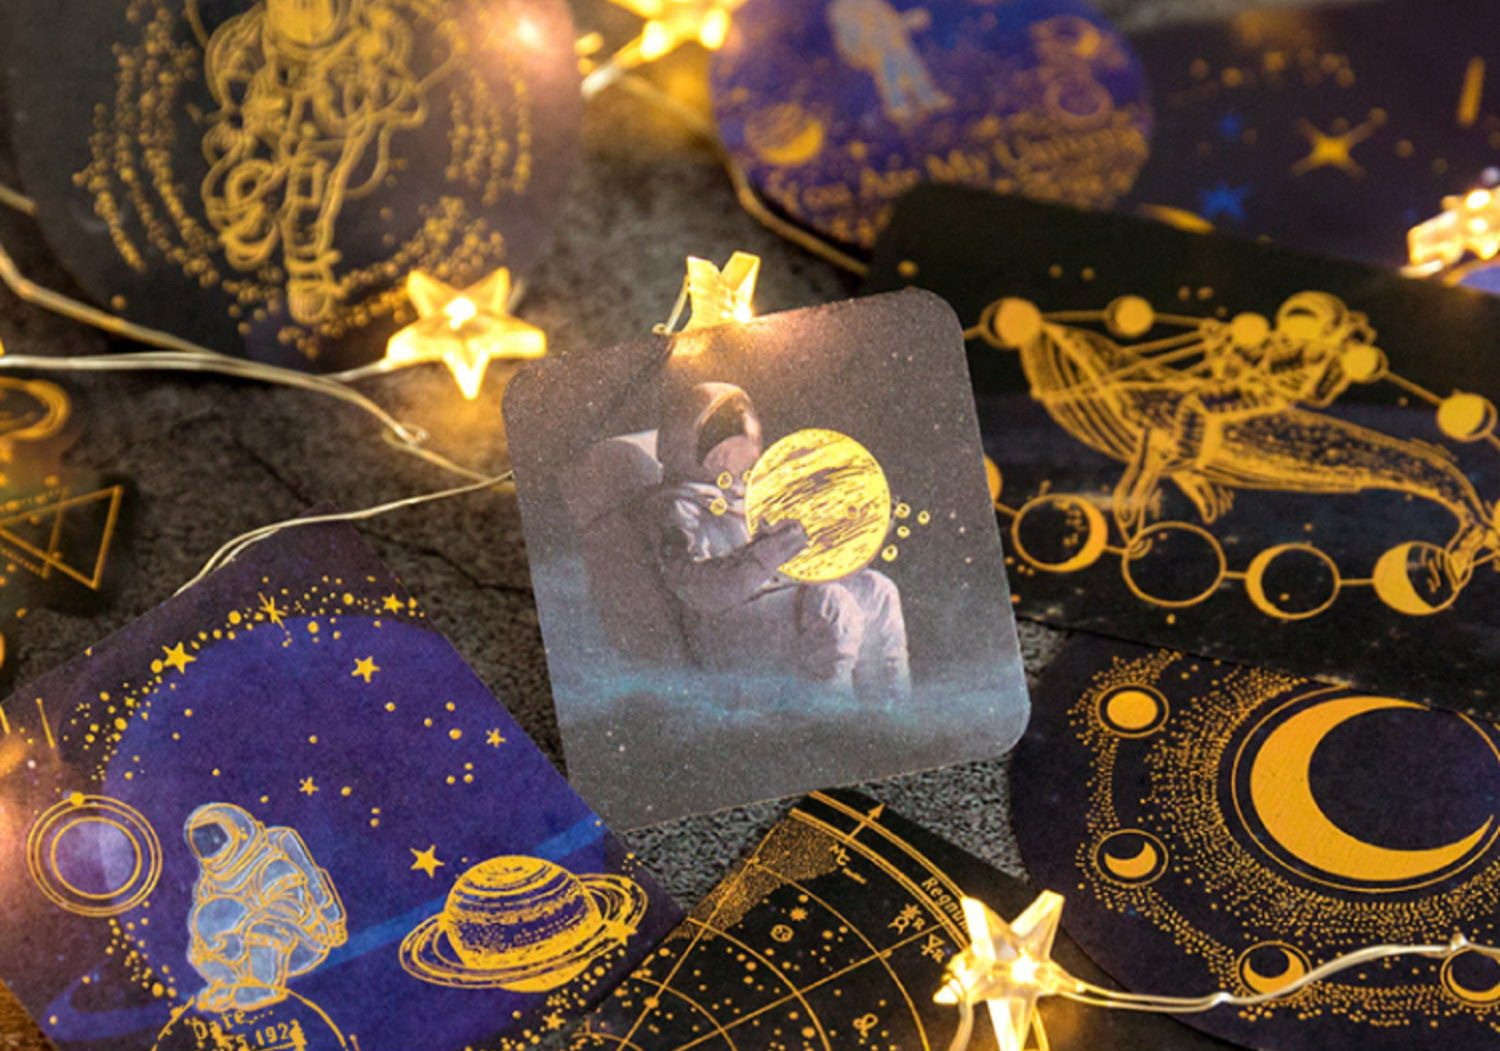 Celestial sticker pack - 6 sheets of paper stickers